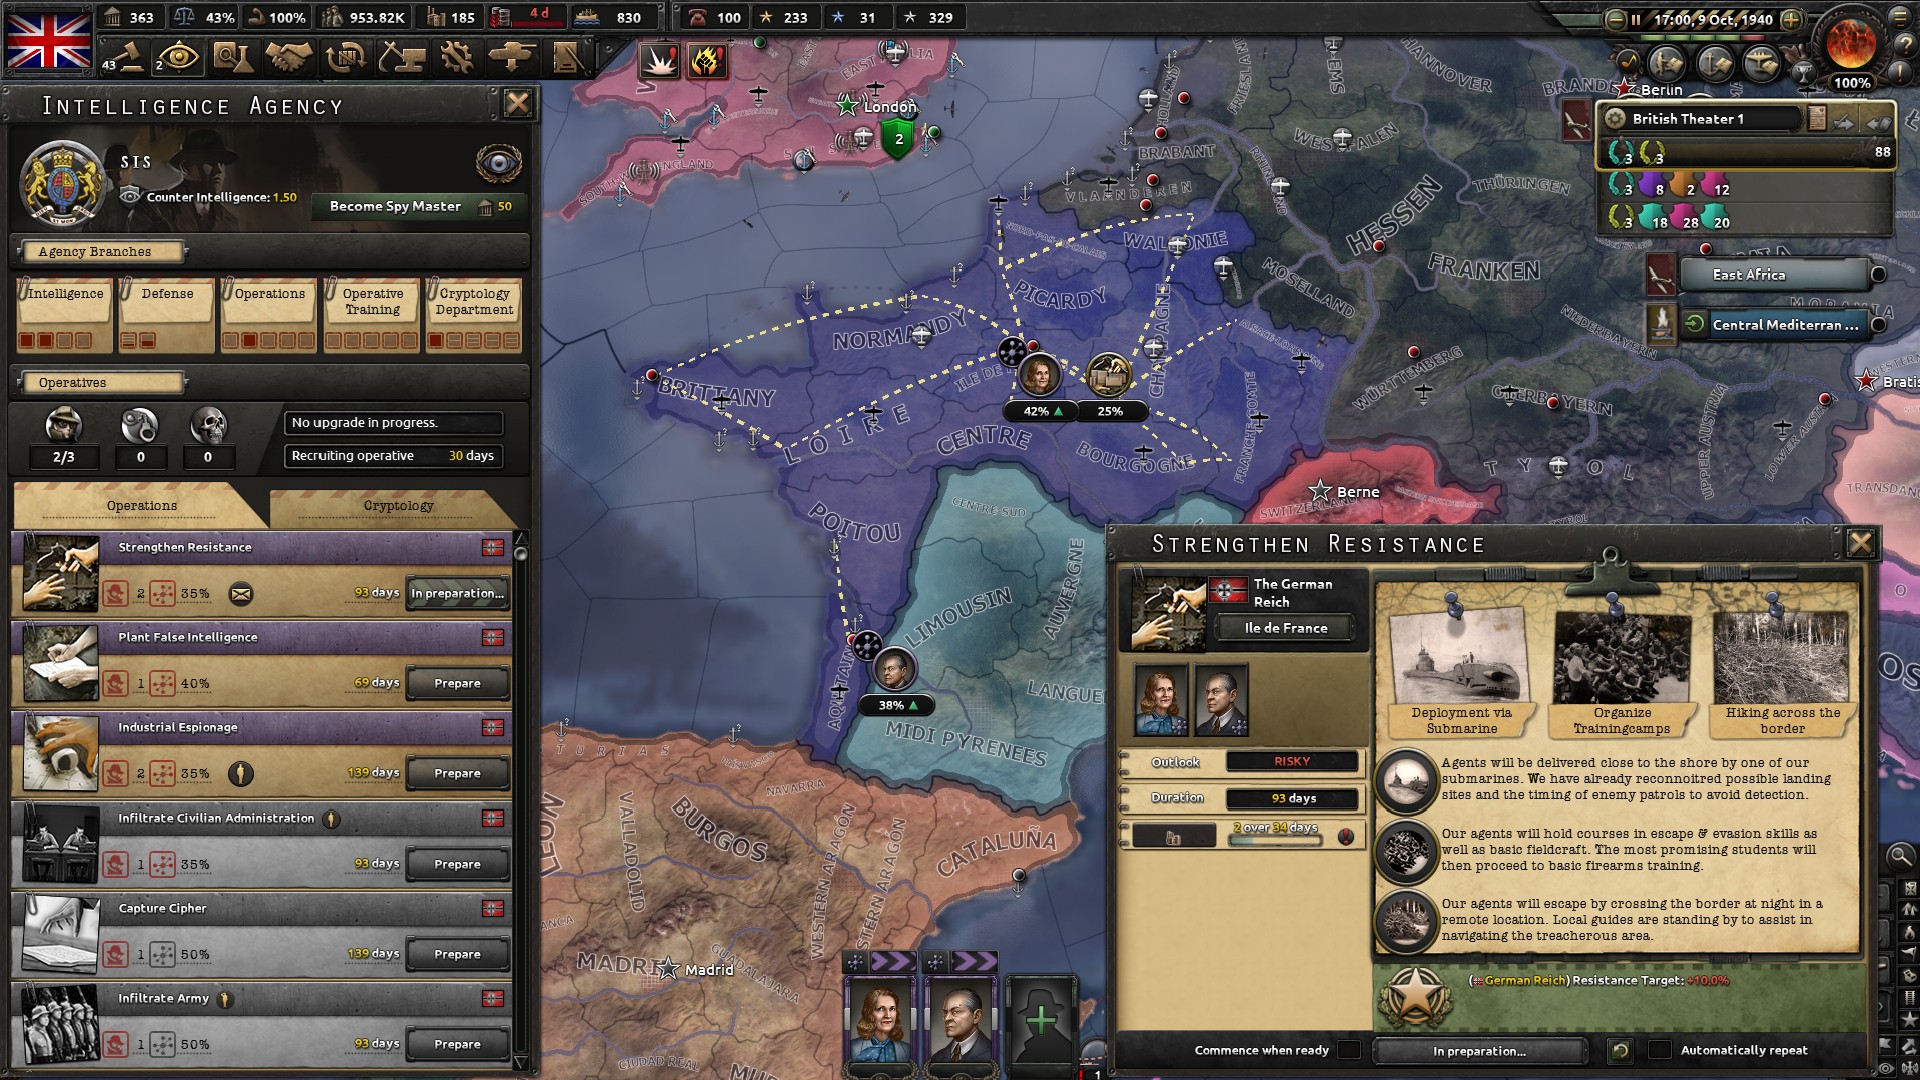 hearts of iron iv cheat engine experience